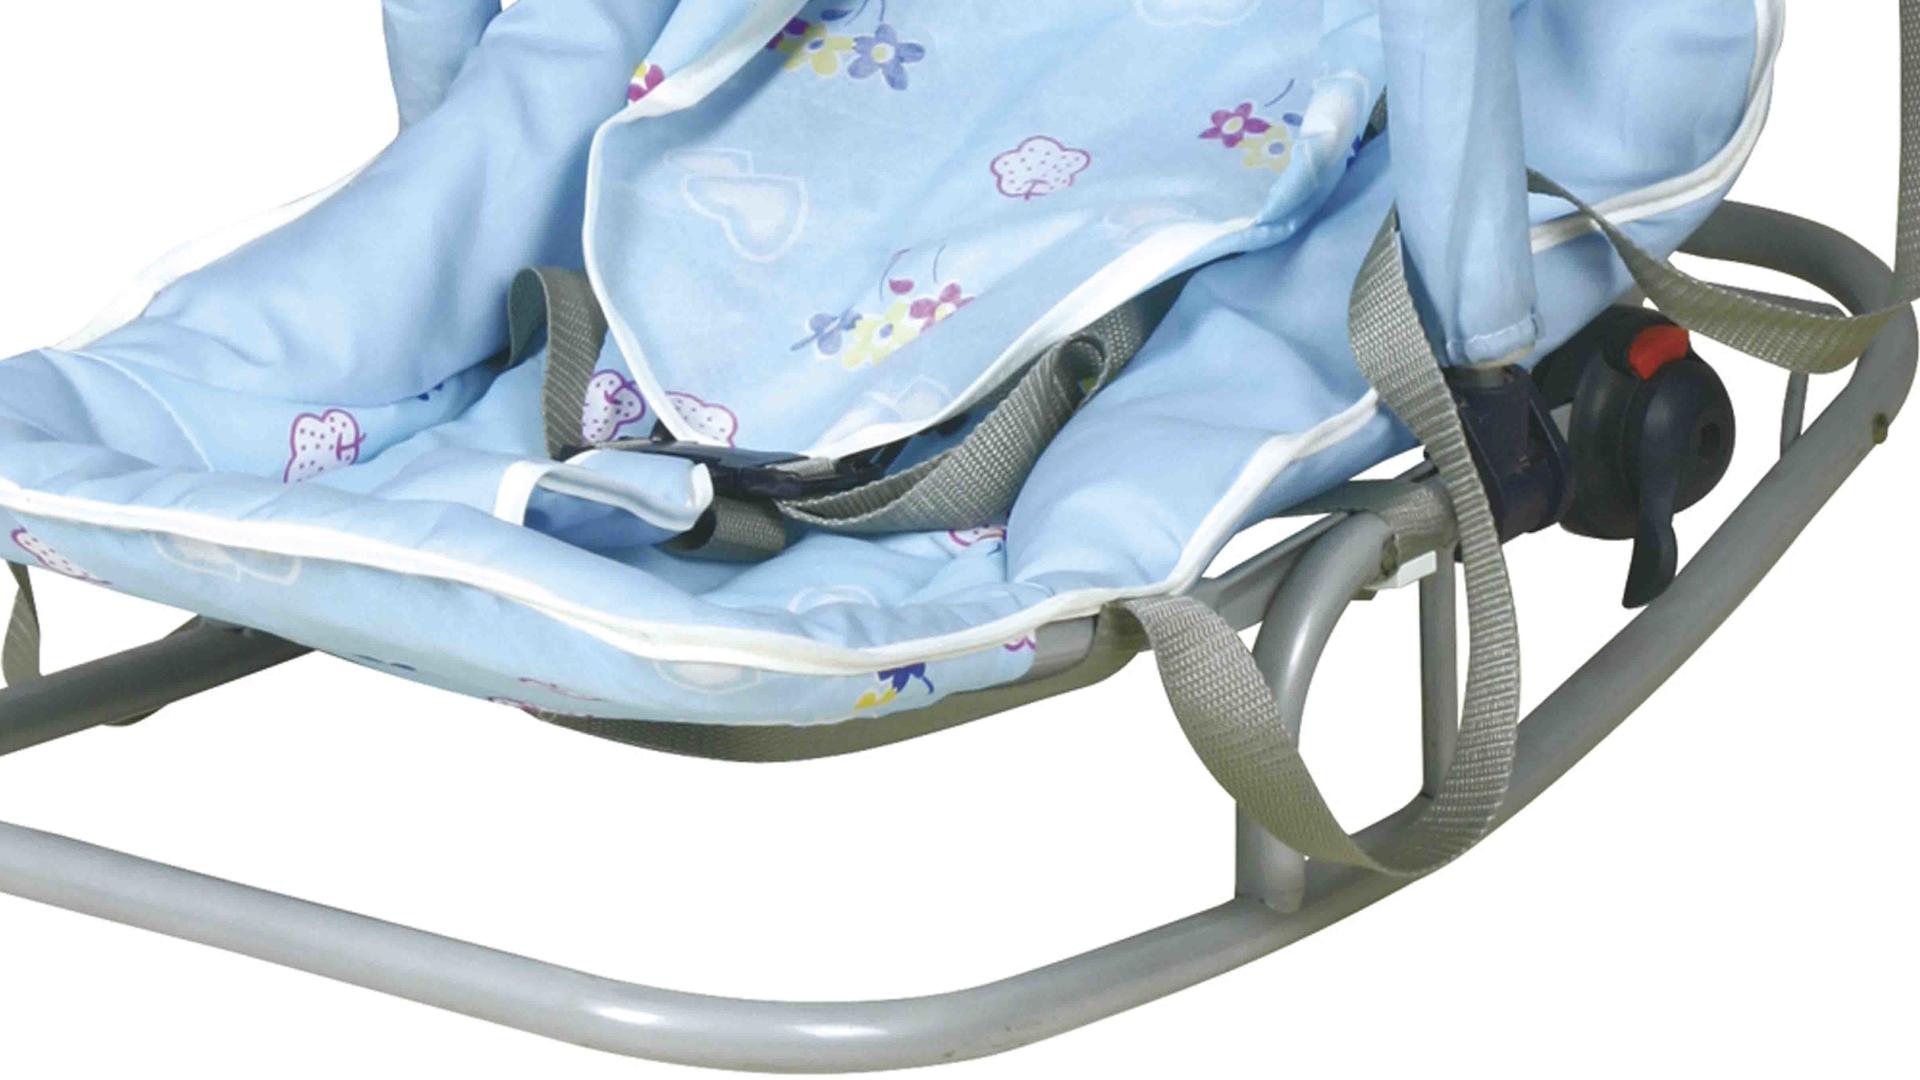 Aoqi baby bouncer online factory price for bedroom